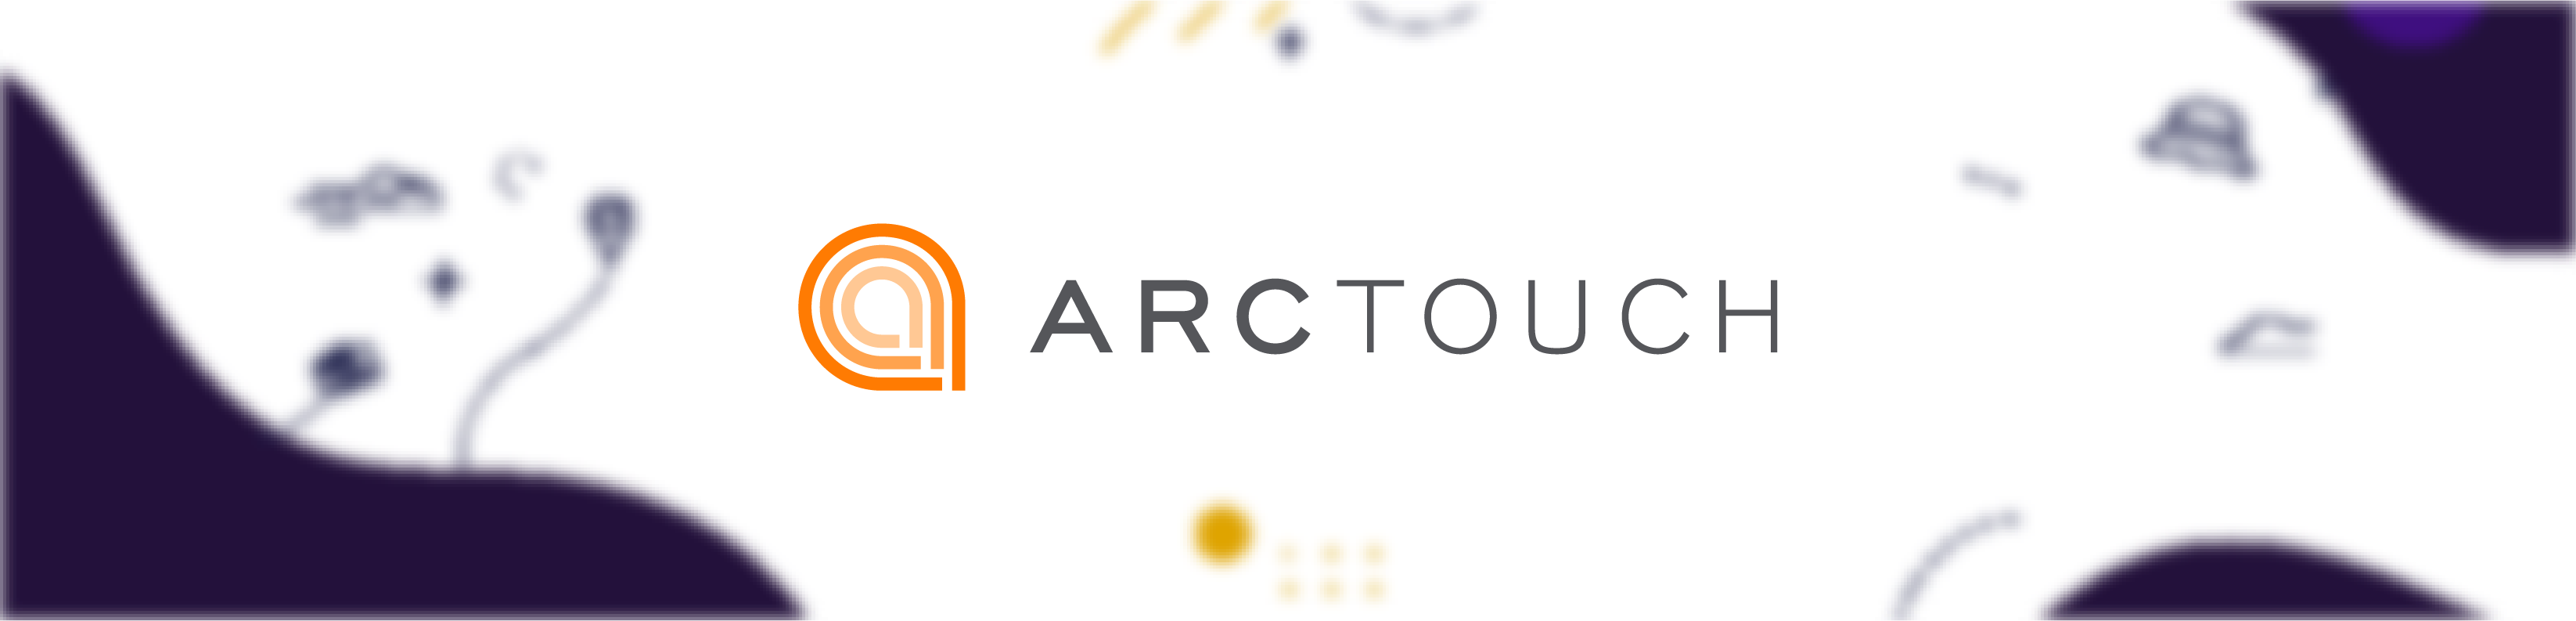 Arctouch